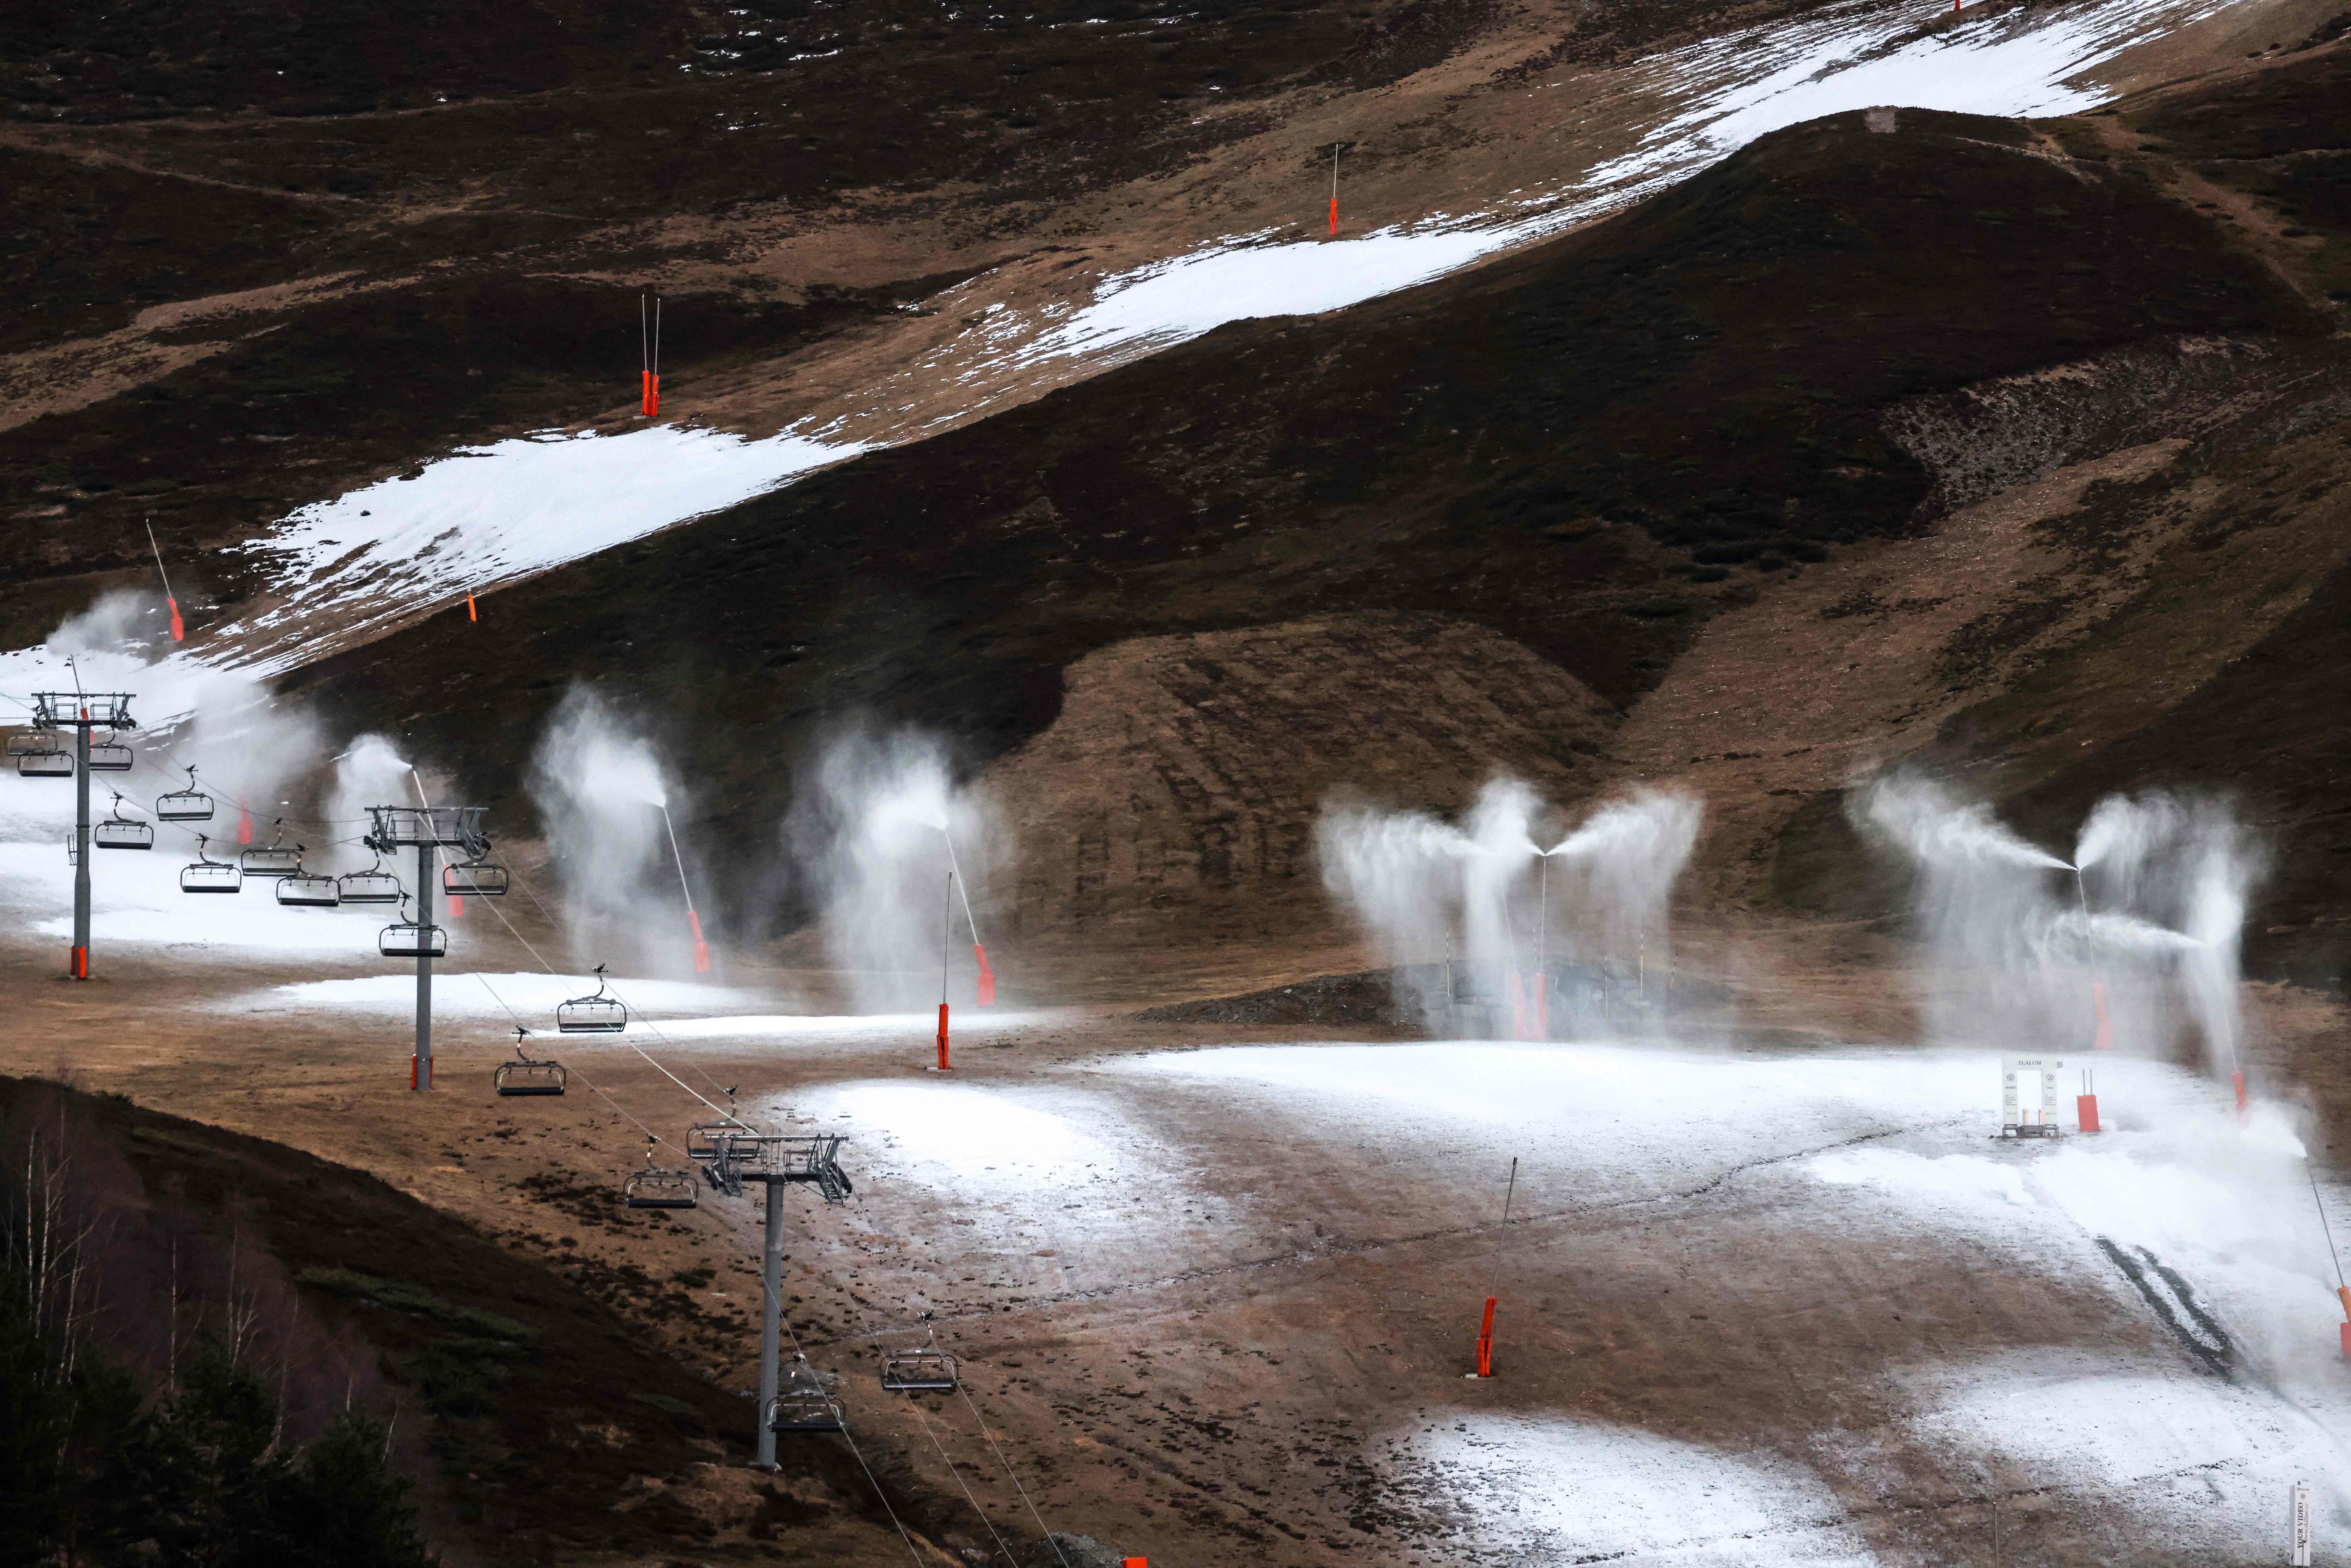 Snow cannons operate due to lack of snow at the Peyragudes ski resort, southwestern France